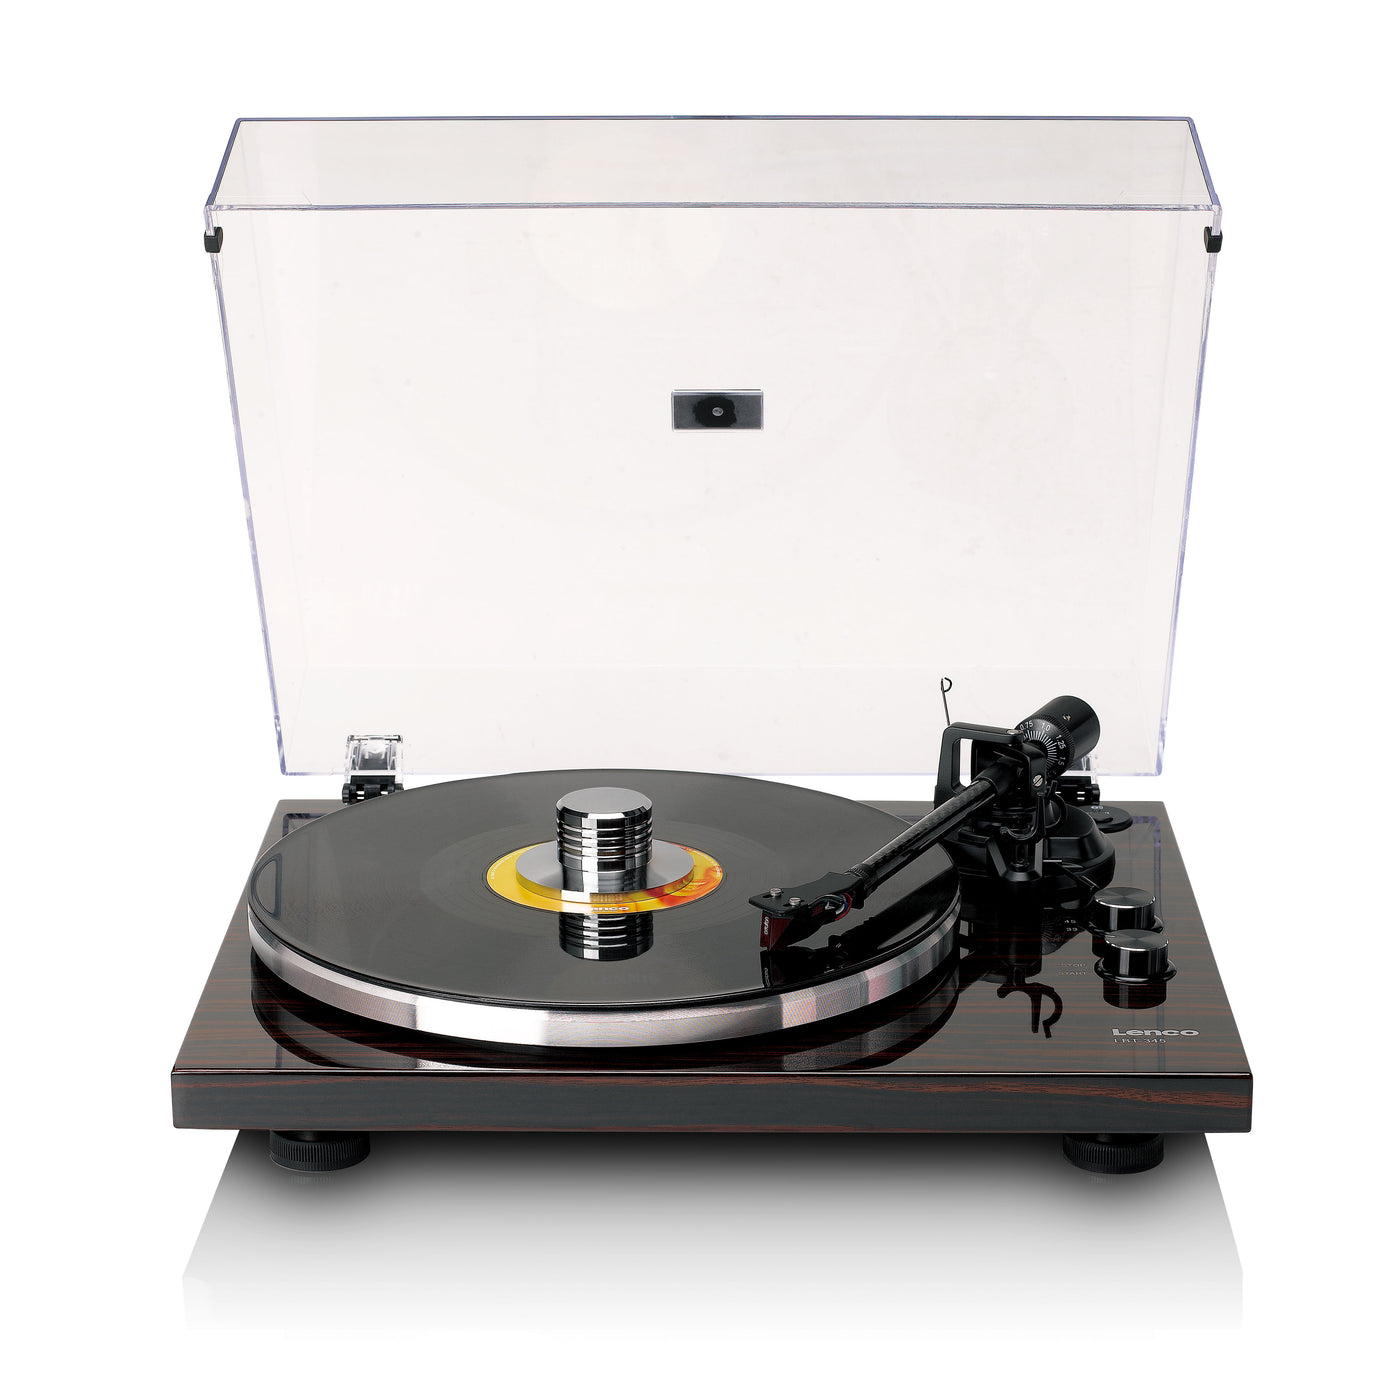 LENCO LBT-345WA - Turntable with Bluetooth® and Ortofon 2M Red cartridge, including chrome-plated record stabilizer - Walnut